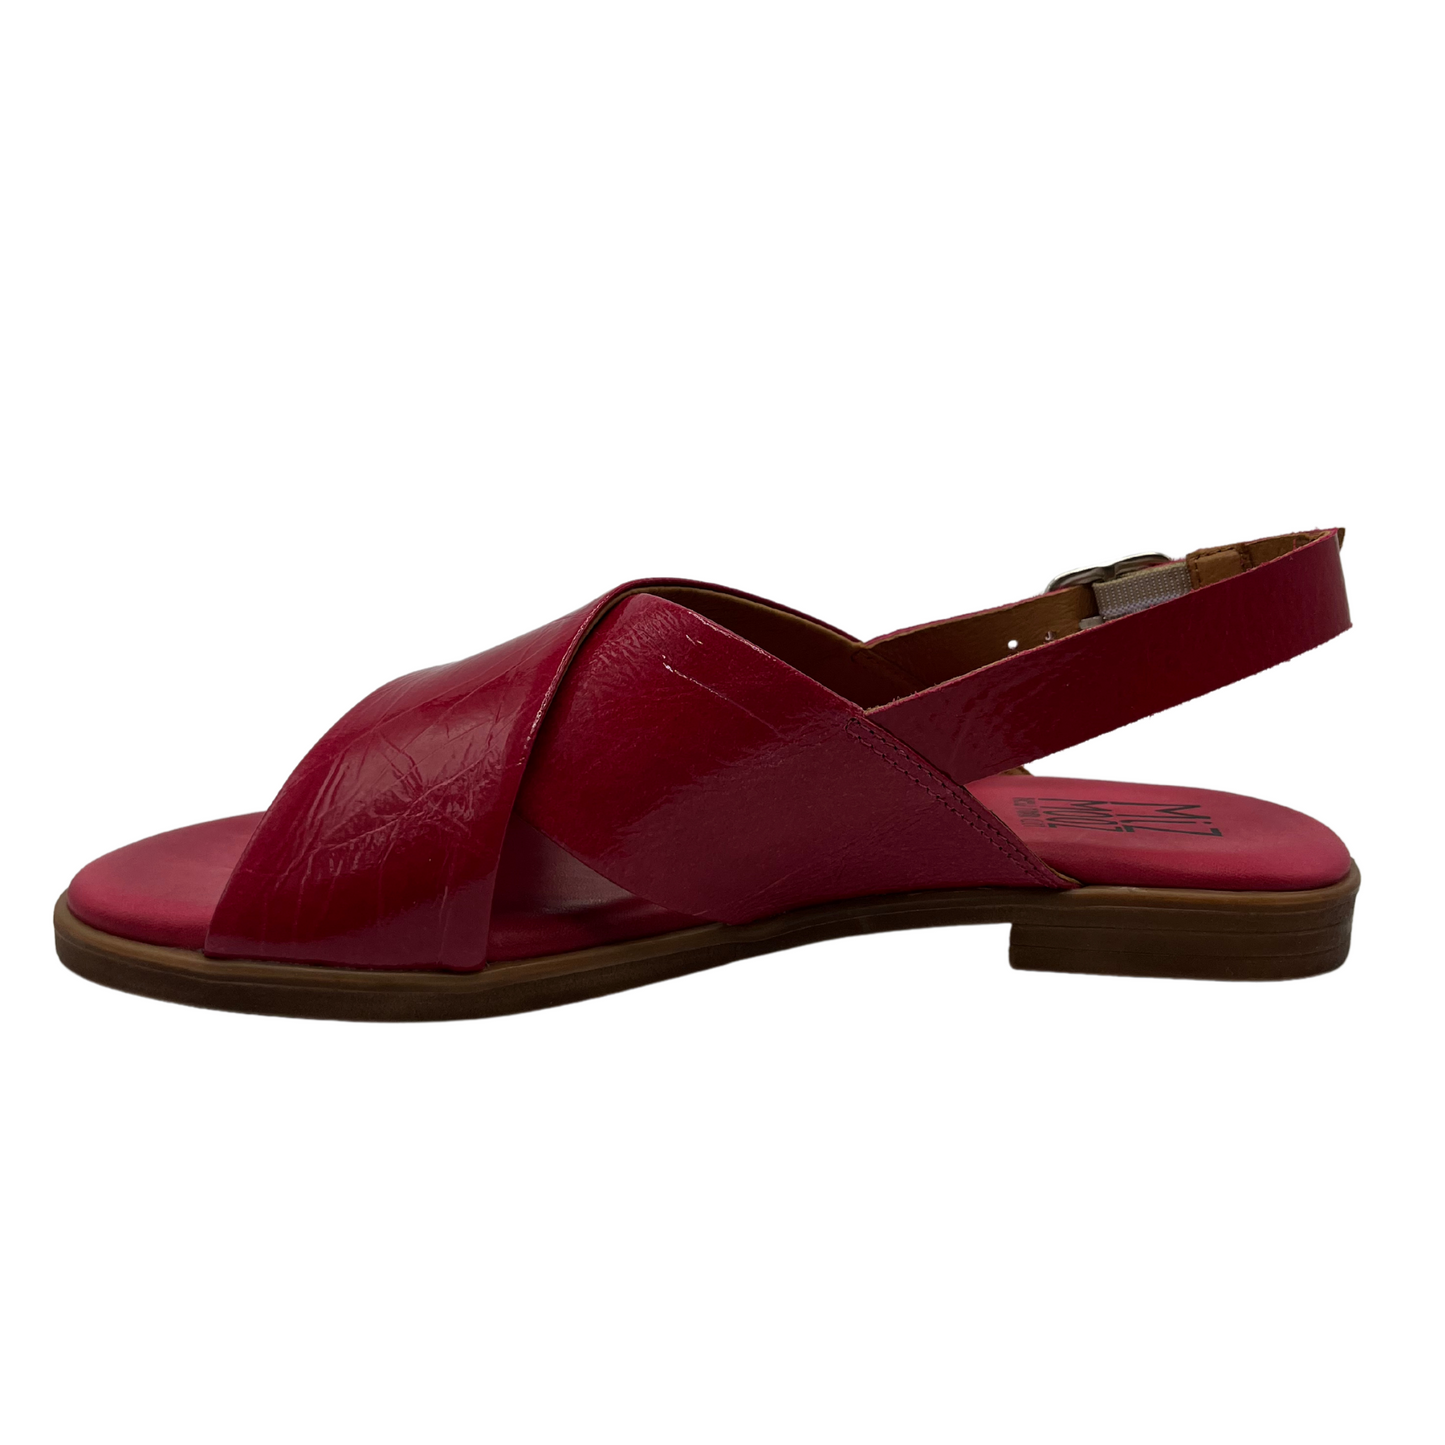 Left facing view of fuchsia leather flat sandal with low heel, buckle sling back strap and open toe